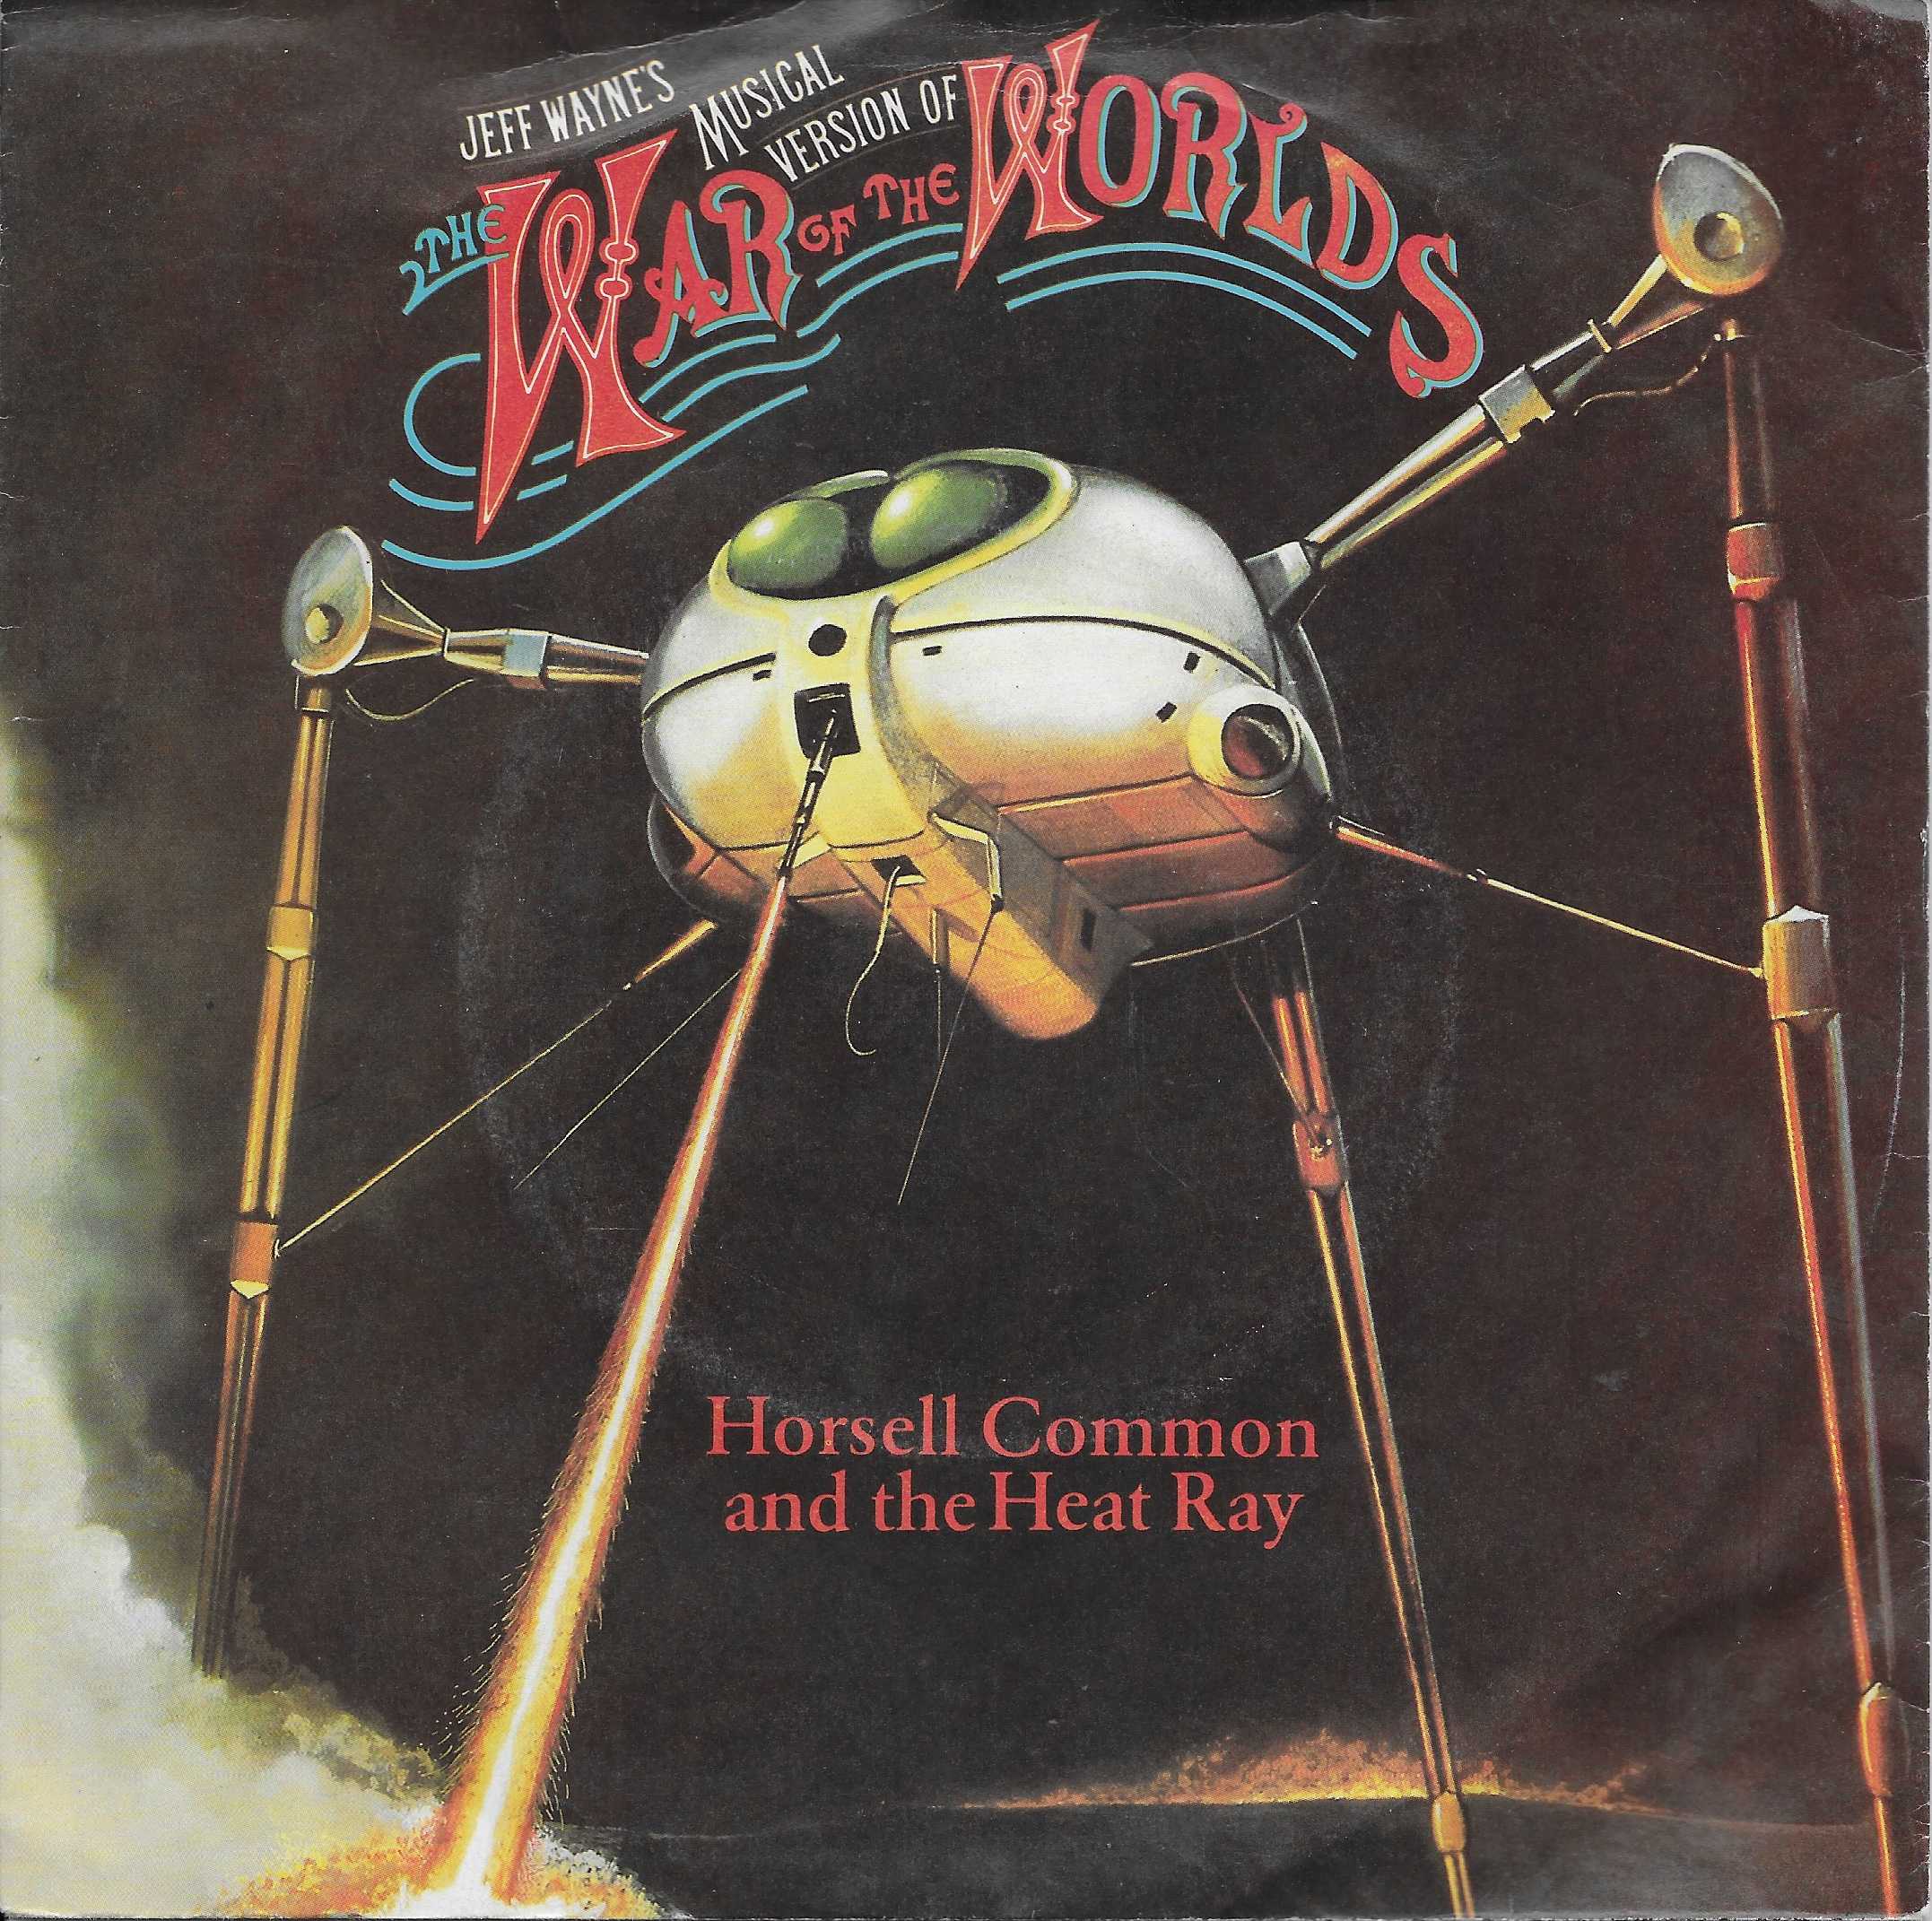 Picture of A 1589 Horsell Common and the heat ray (War of the Worlds) by artist Jeff Wayne from ITV, Channel 4 and Channel 5 library